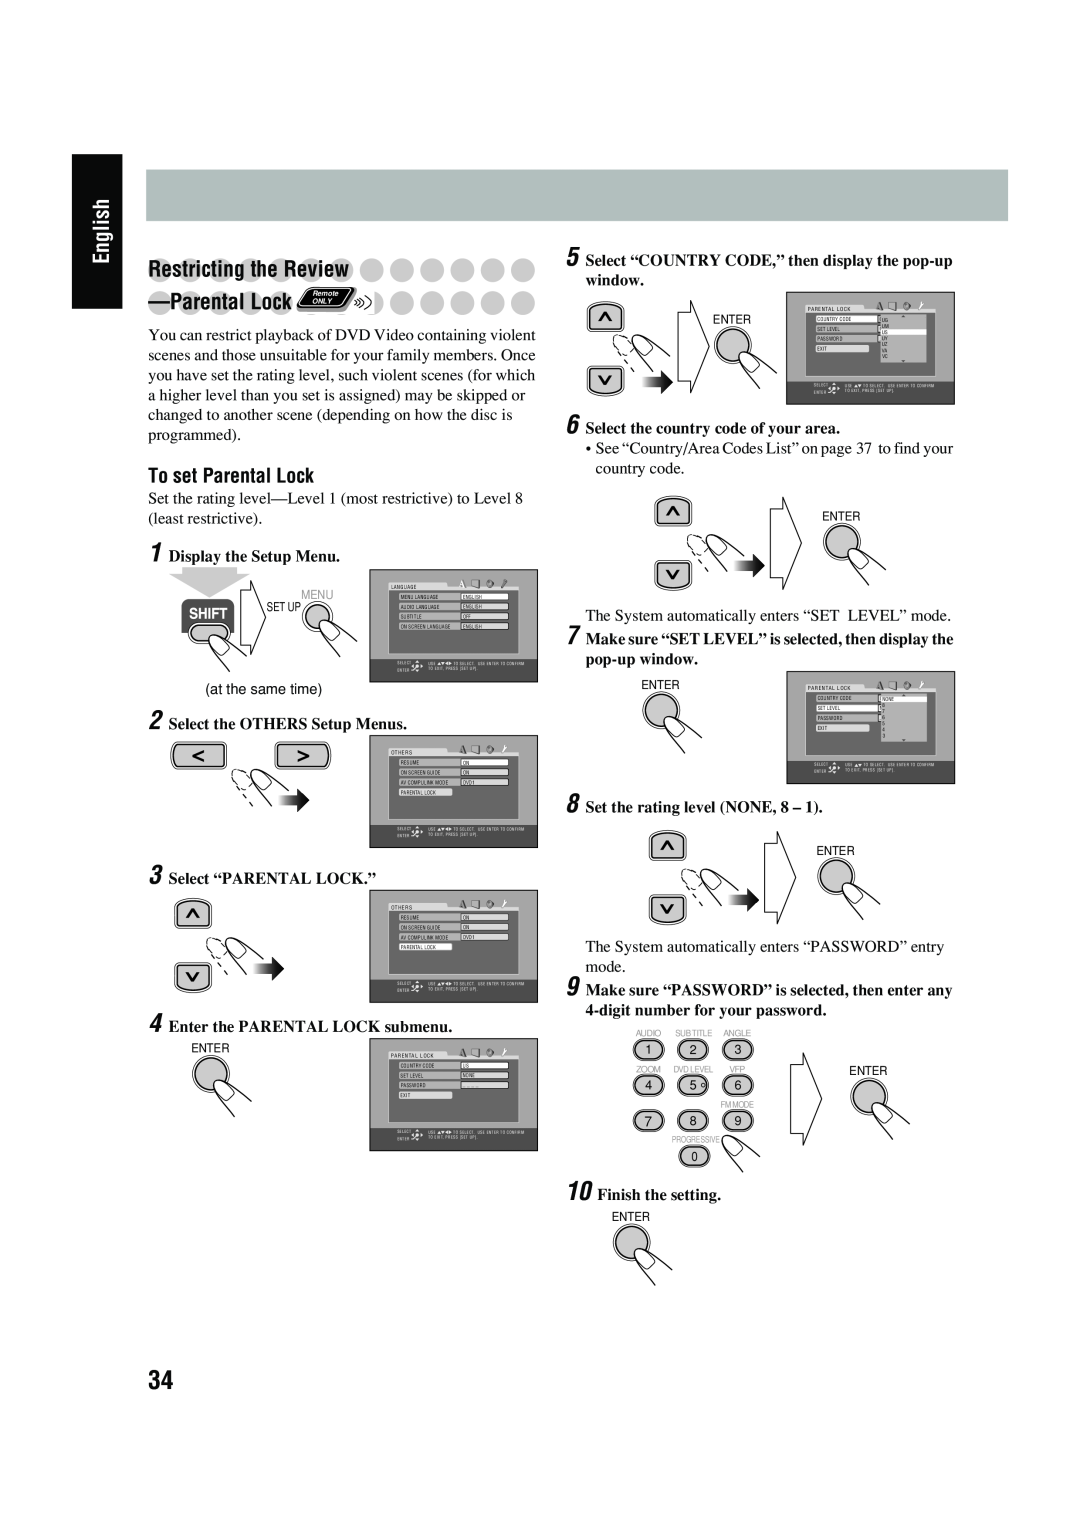 JVC FS-P550 manual Restricting the Review, ParentalLock ONLY, To set Parental Lock, Select the OTHERS Setup Menus, English 